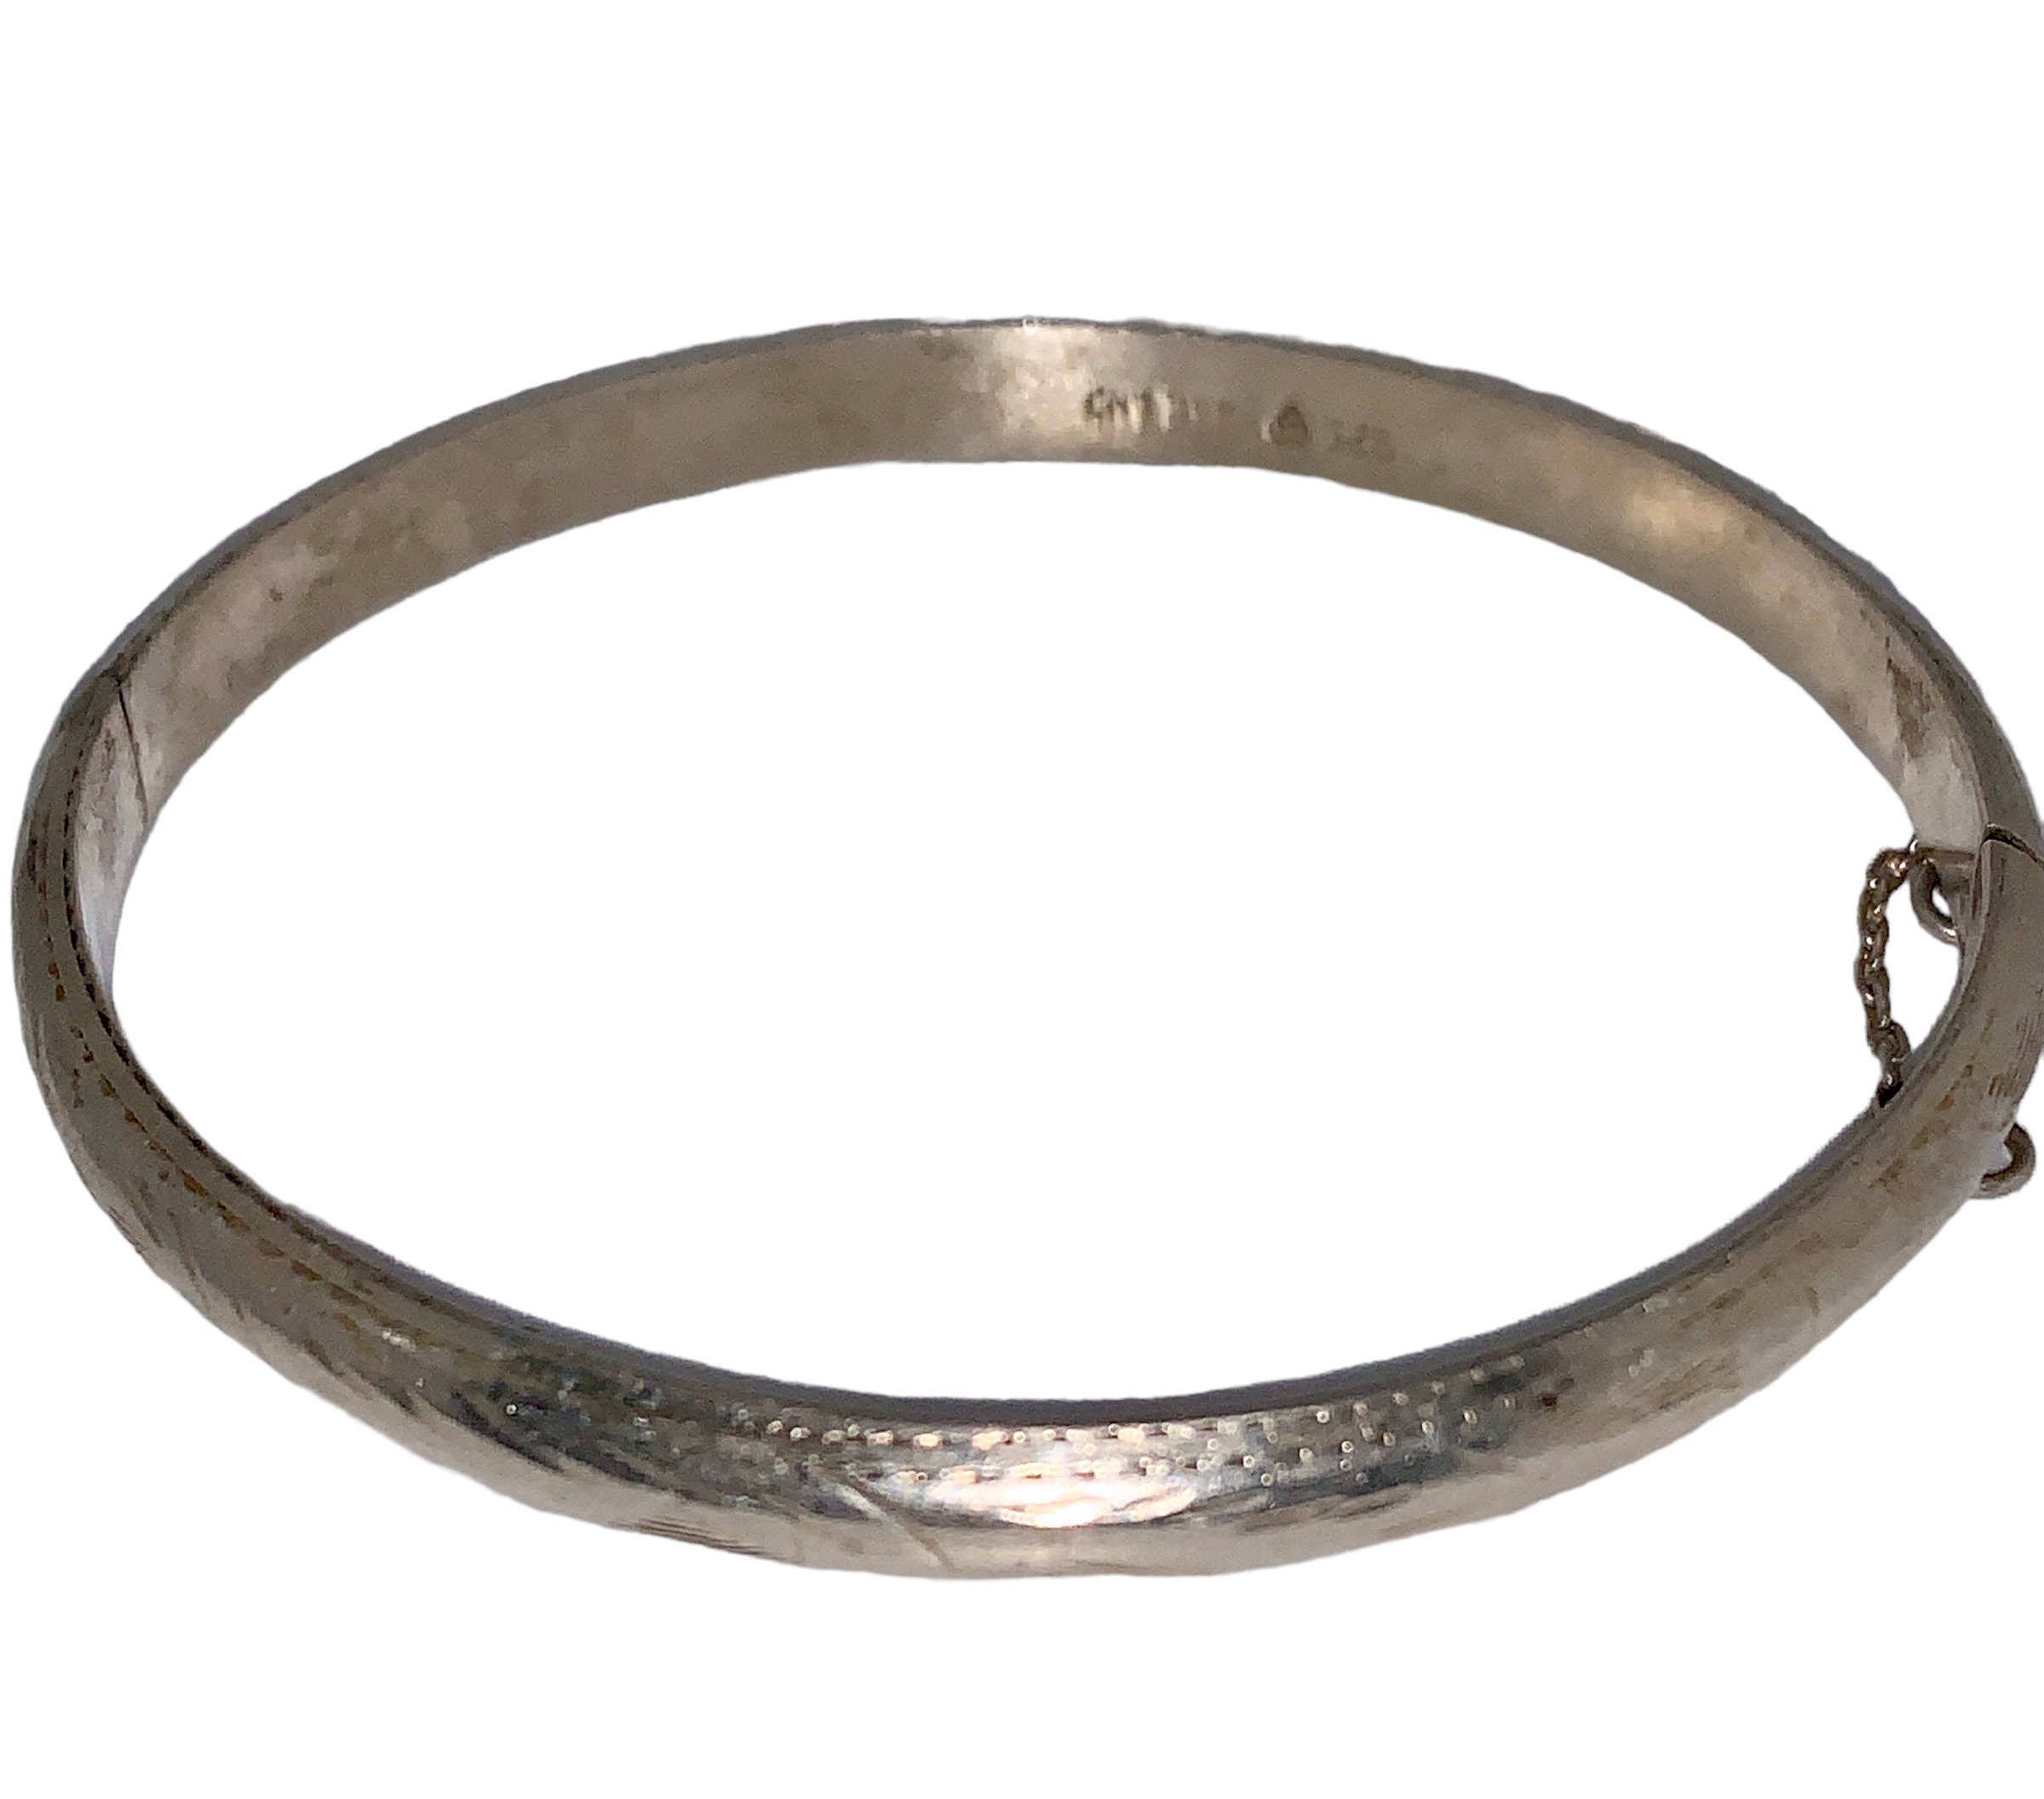 of Bracelet, Lot Mischief - Silver Through My Sterling BANGLE From Heavy. Etsy a Been Youth.